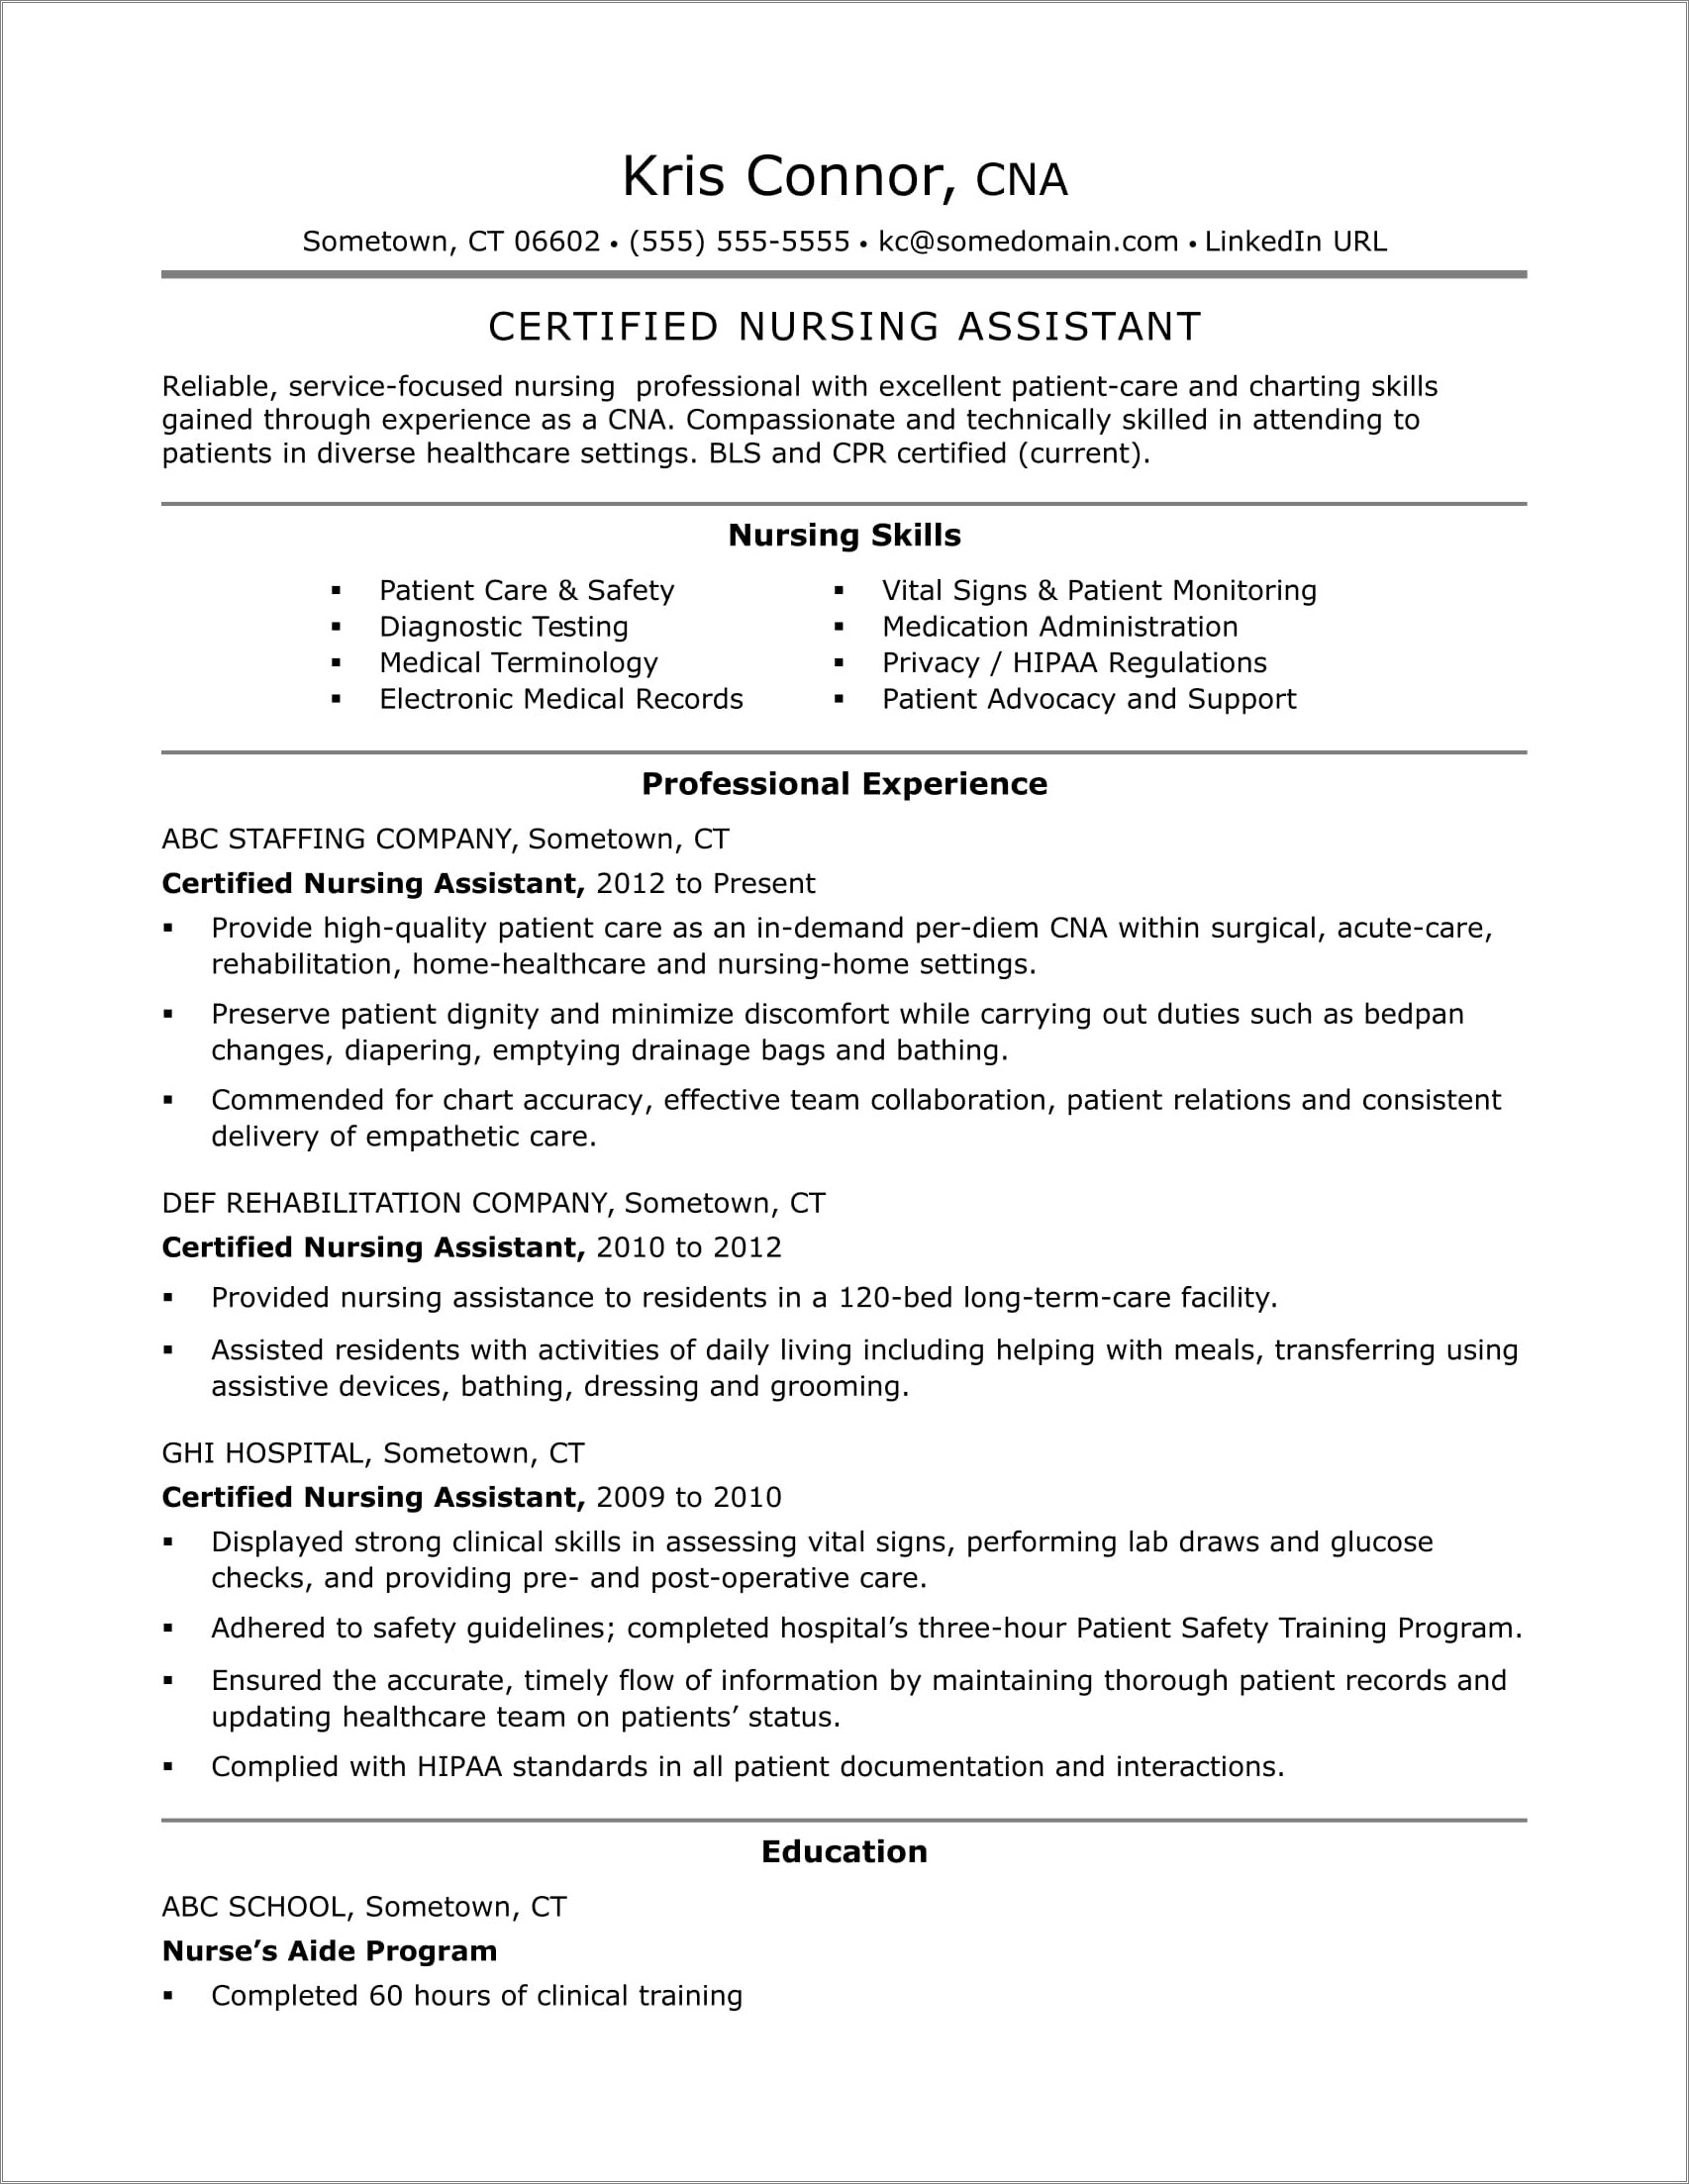 Listing Skills And Abilities On A Resume